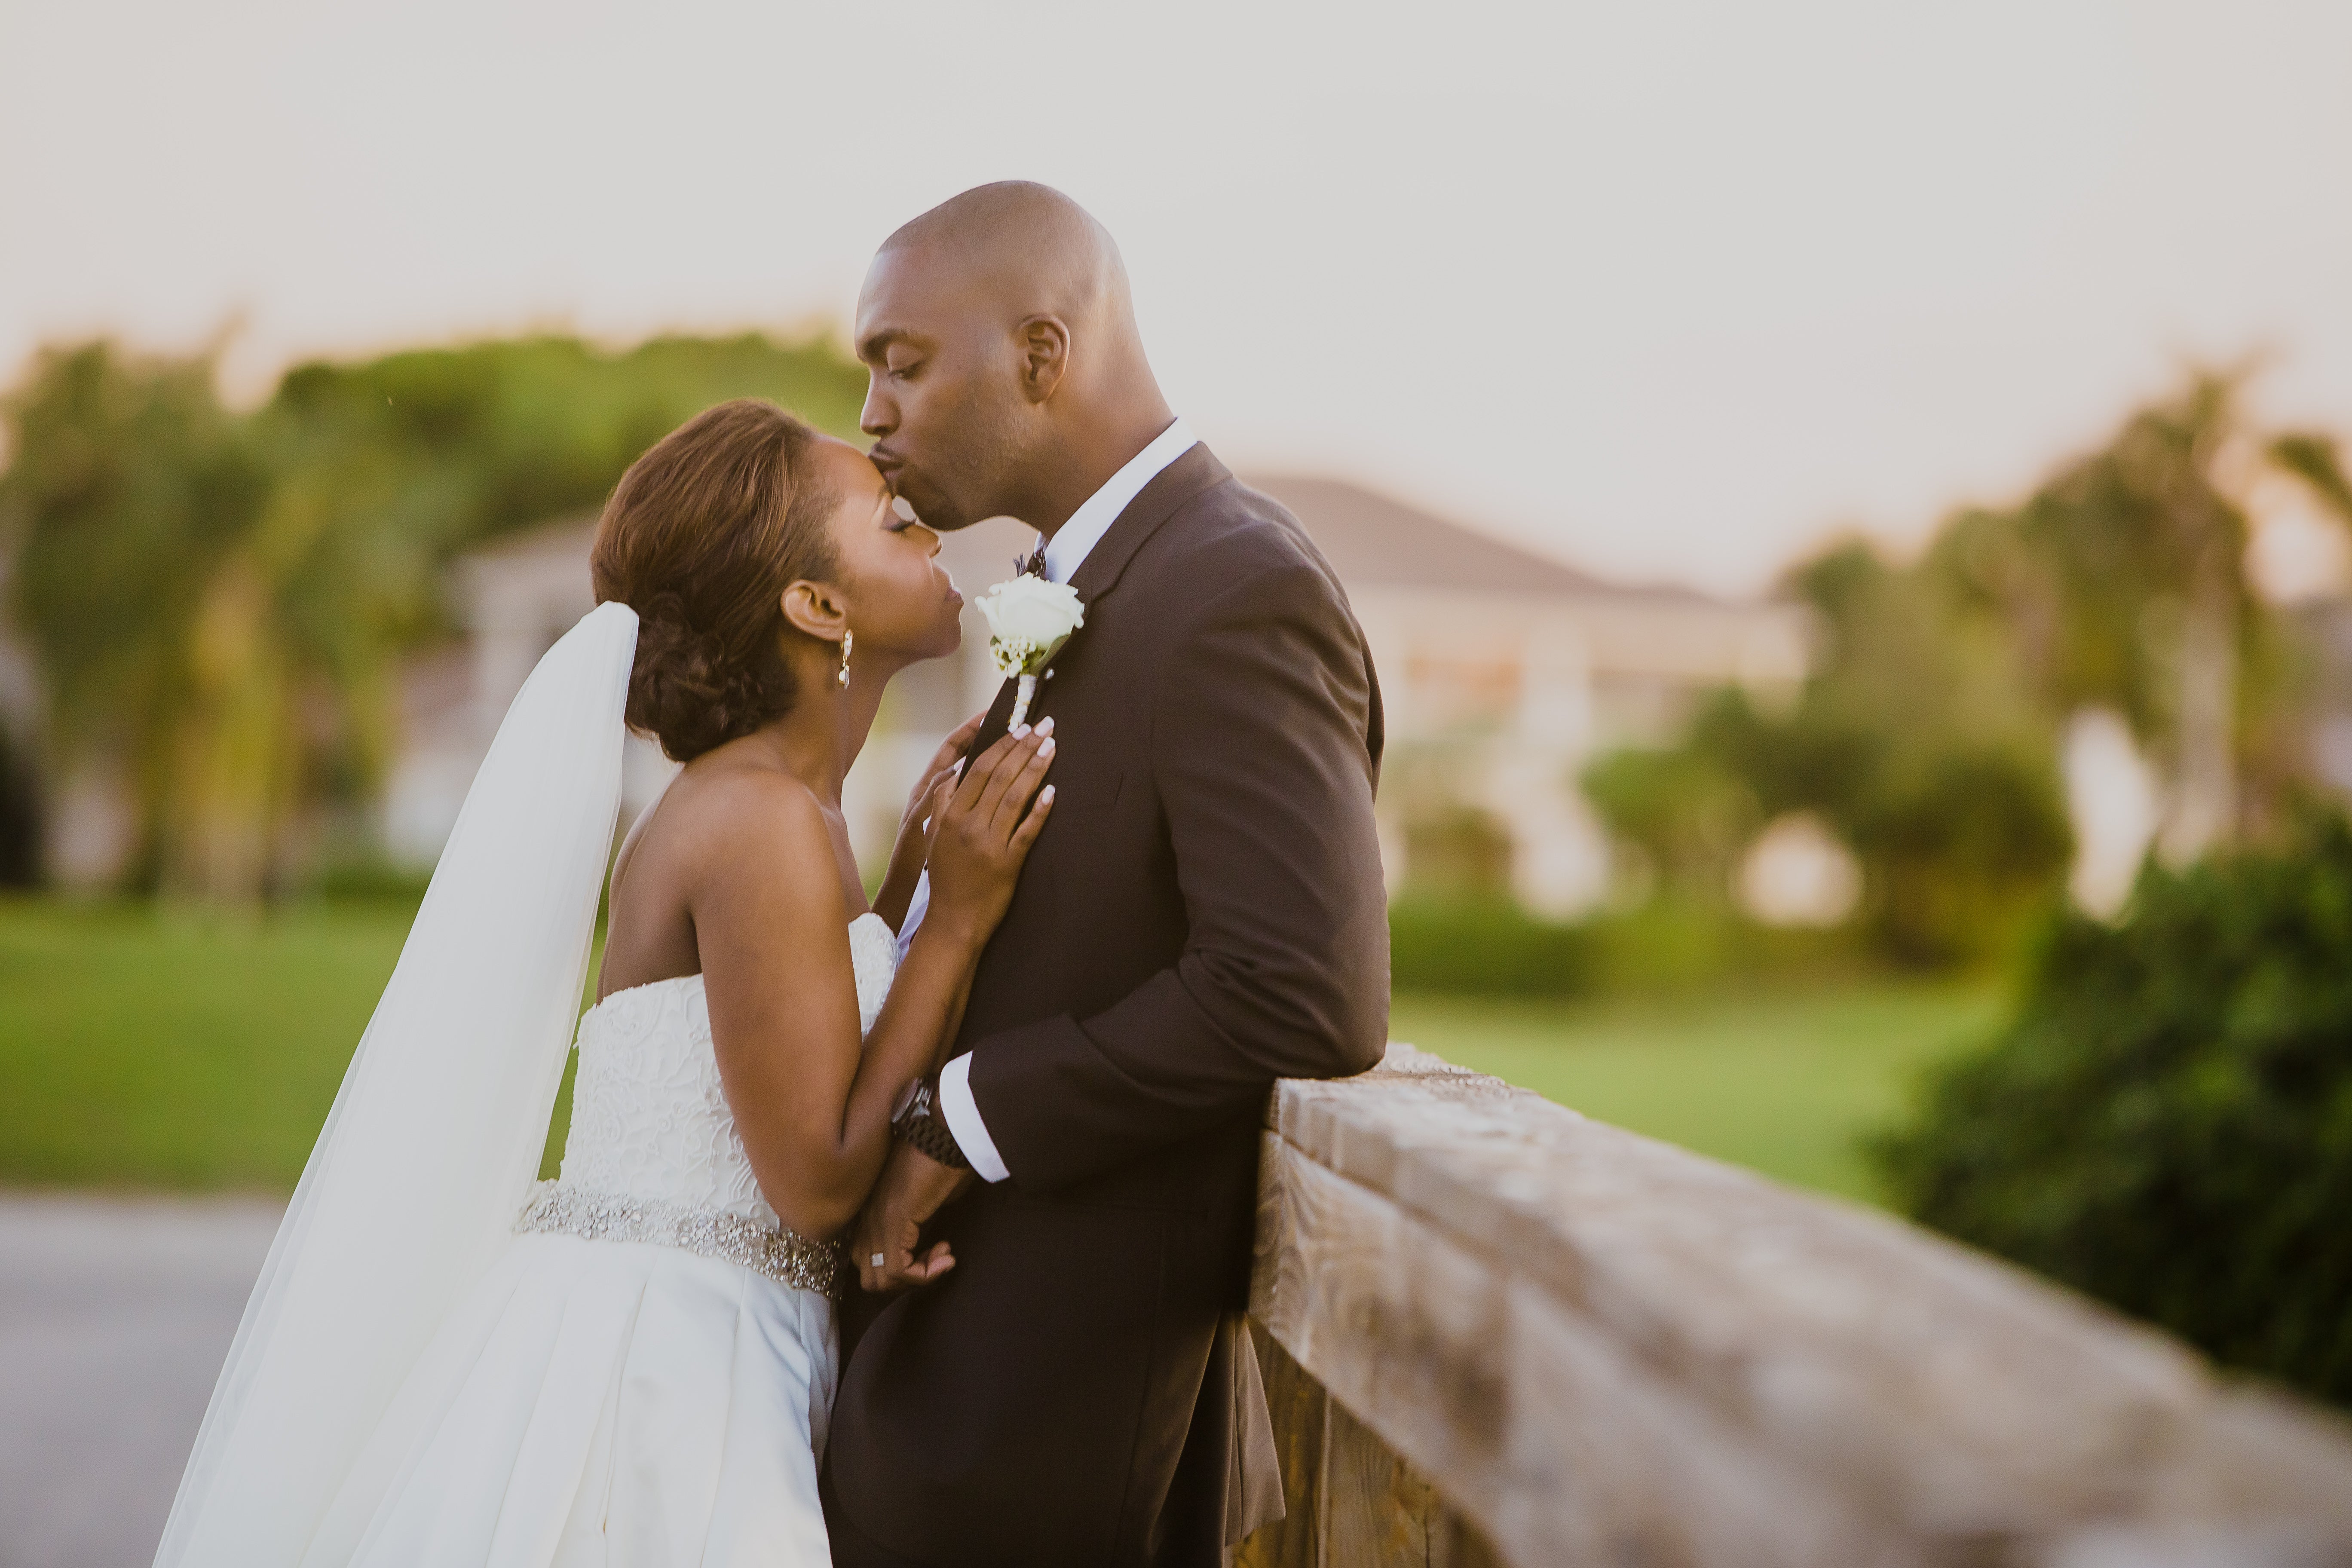 Bridal Bliss: Michael and Hollani's Sweet Florida Ceremony Is As Good As It Gets
